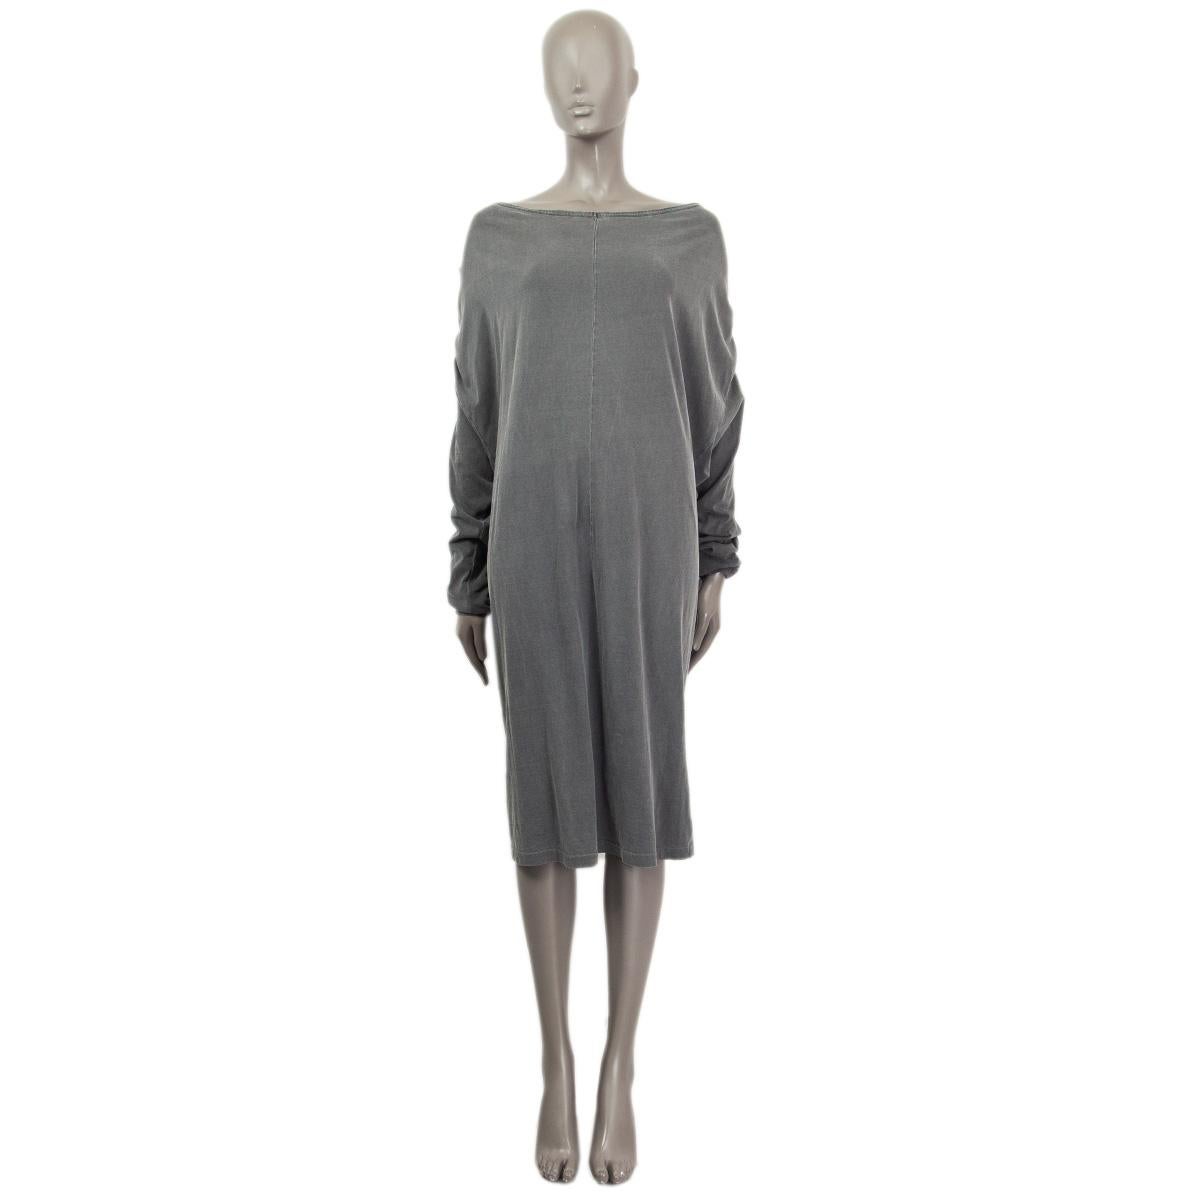 100% authentic Balenciaga tie-back dress in gray cotton jersey (100% - please note content tag is missing) with long bat sleeves and an open cascading back. Has been worn and is in excellent condition.

Measurements
Tag Size	Missing